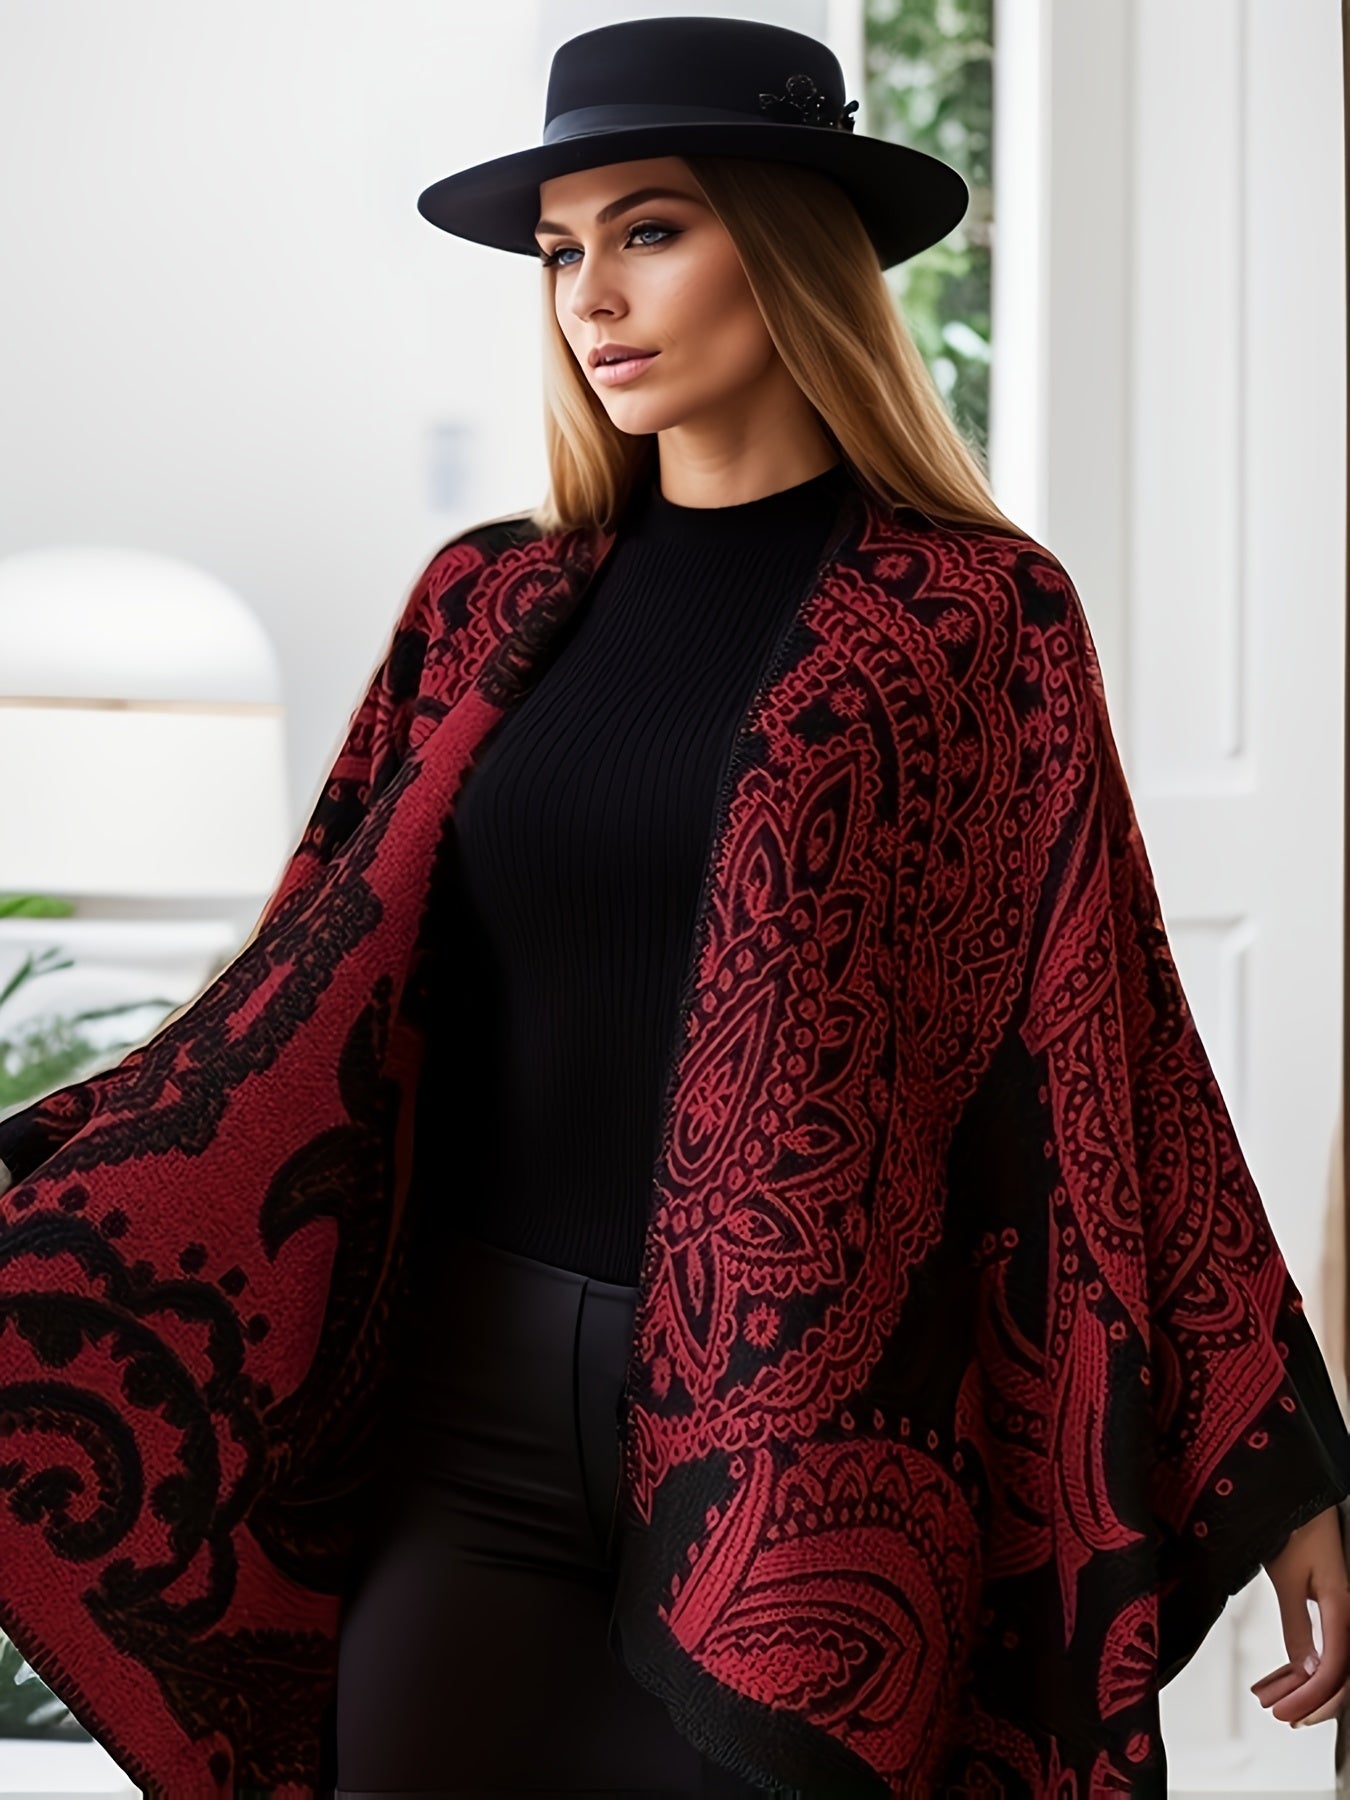 A person wearing a black hat, a black top, and an elegant patterned red and black shawl stands indoors, looking to the side. The Maramalive™ Plus Size Ethnic Style Coat, Women's Plus Tribal Print Batwing Sleeve Open Front Waterfall Collar Shawl Cape Coat adds a touch of sophistication perfect for the Fall/Winter season.